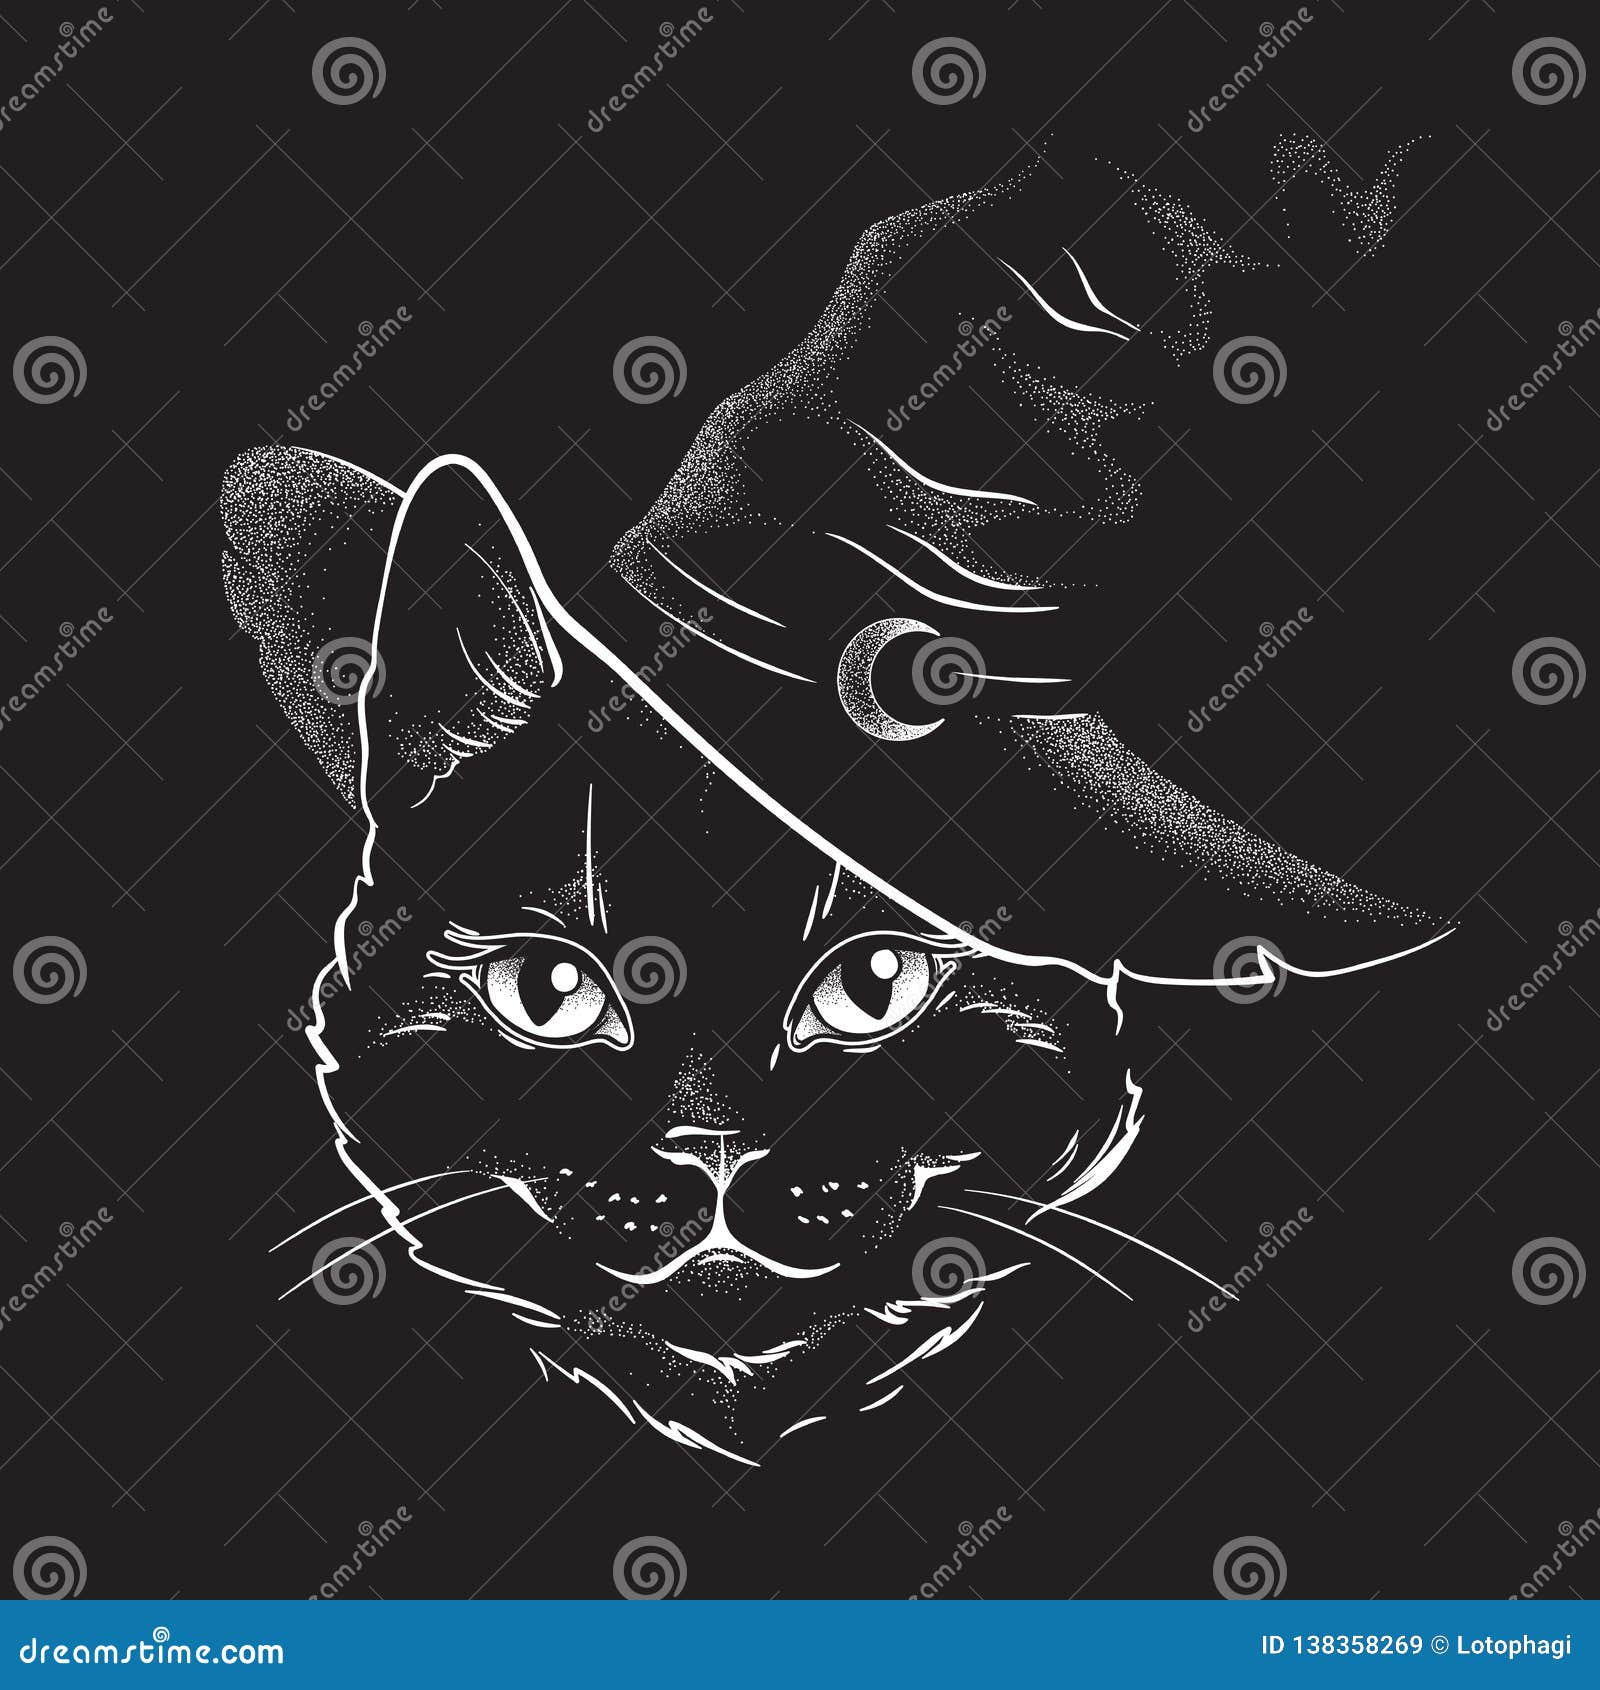 black cat with pointy witch hat line art and dot work. wiccan familiar spirit, halloween or pagan witchcraft theme tapestry print